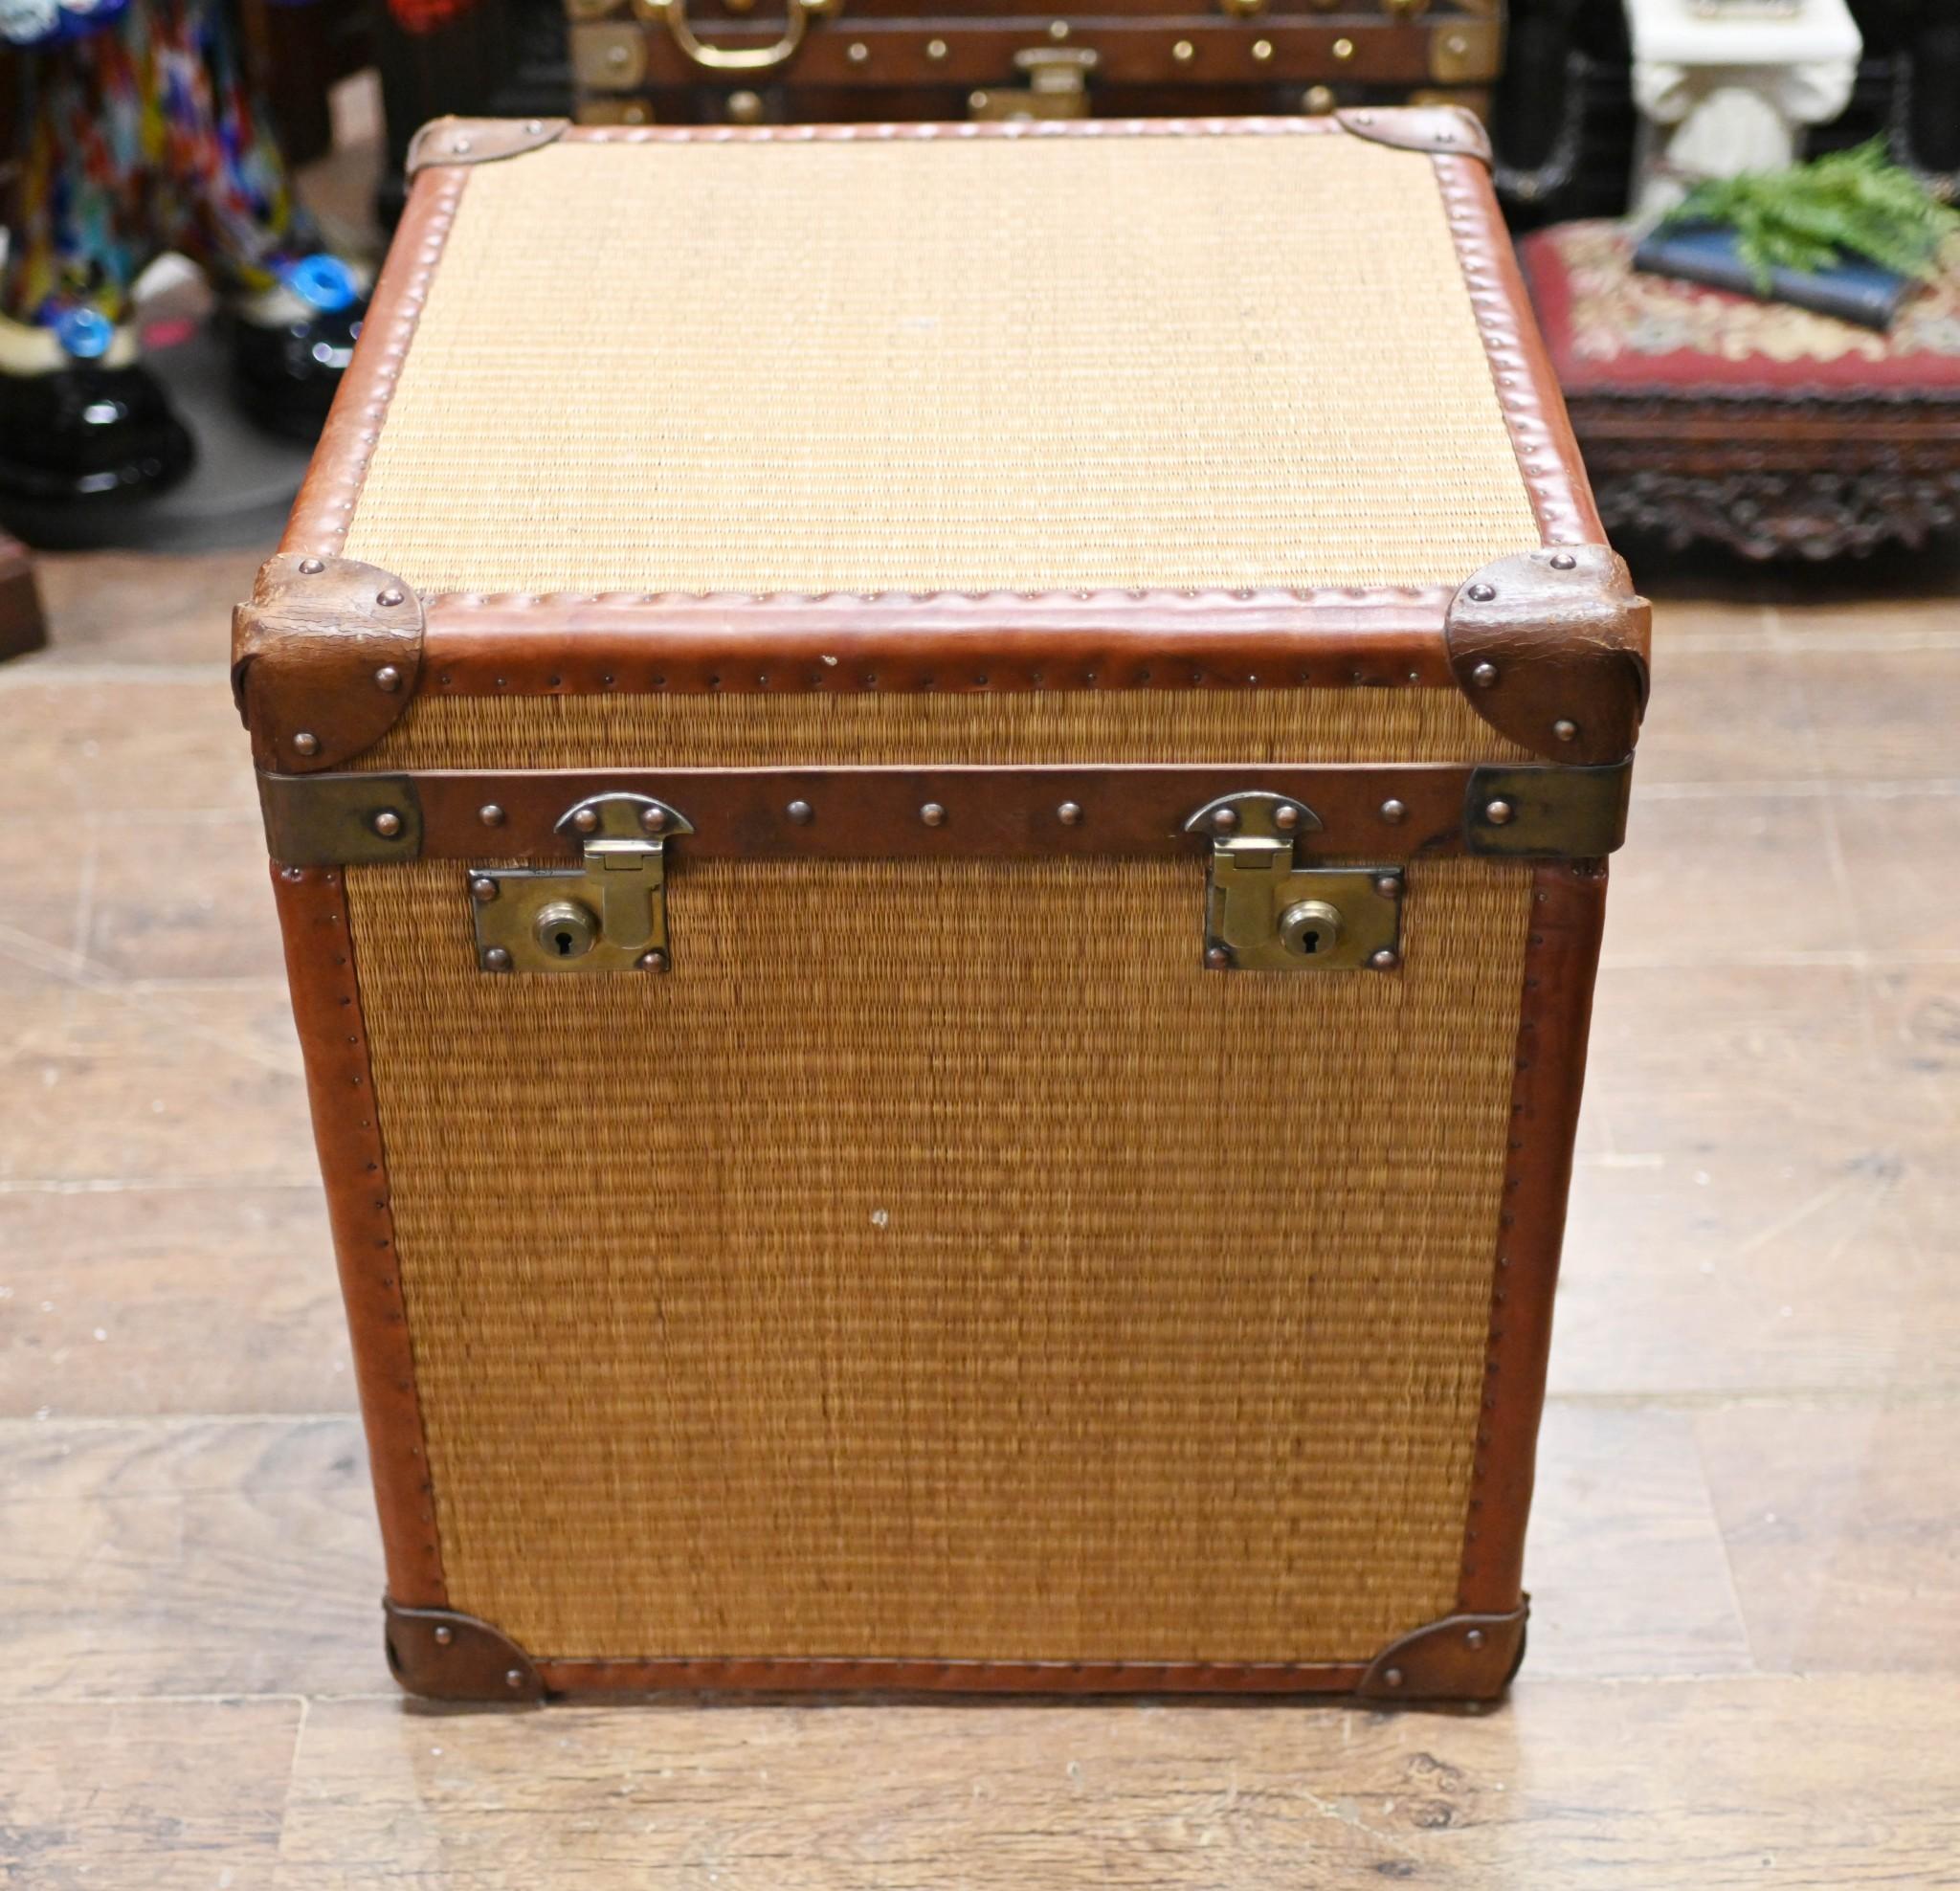 Gorgeous pair of vintage luggage trunks
Finished with an unusual reed finish very on trend
We date these to circa 1950
Would make for a great pair of side tables
Viewings available by appointment
Offered in great shape ready for home use right